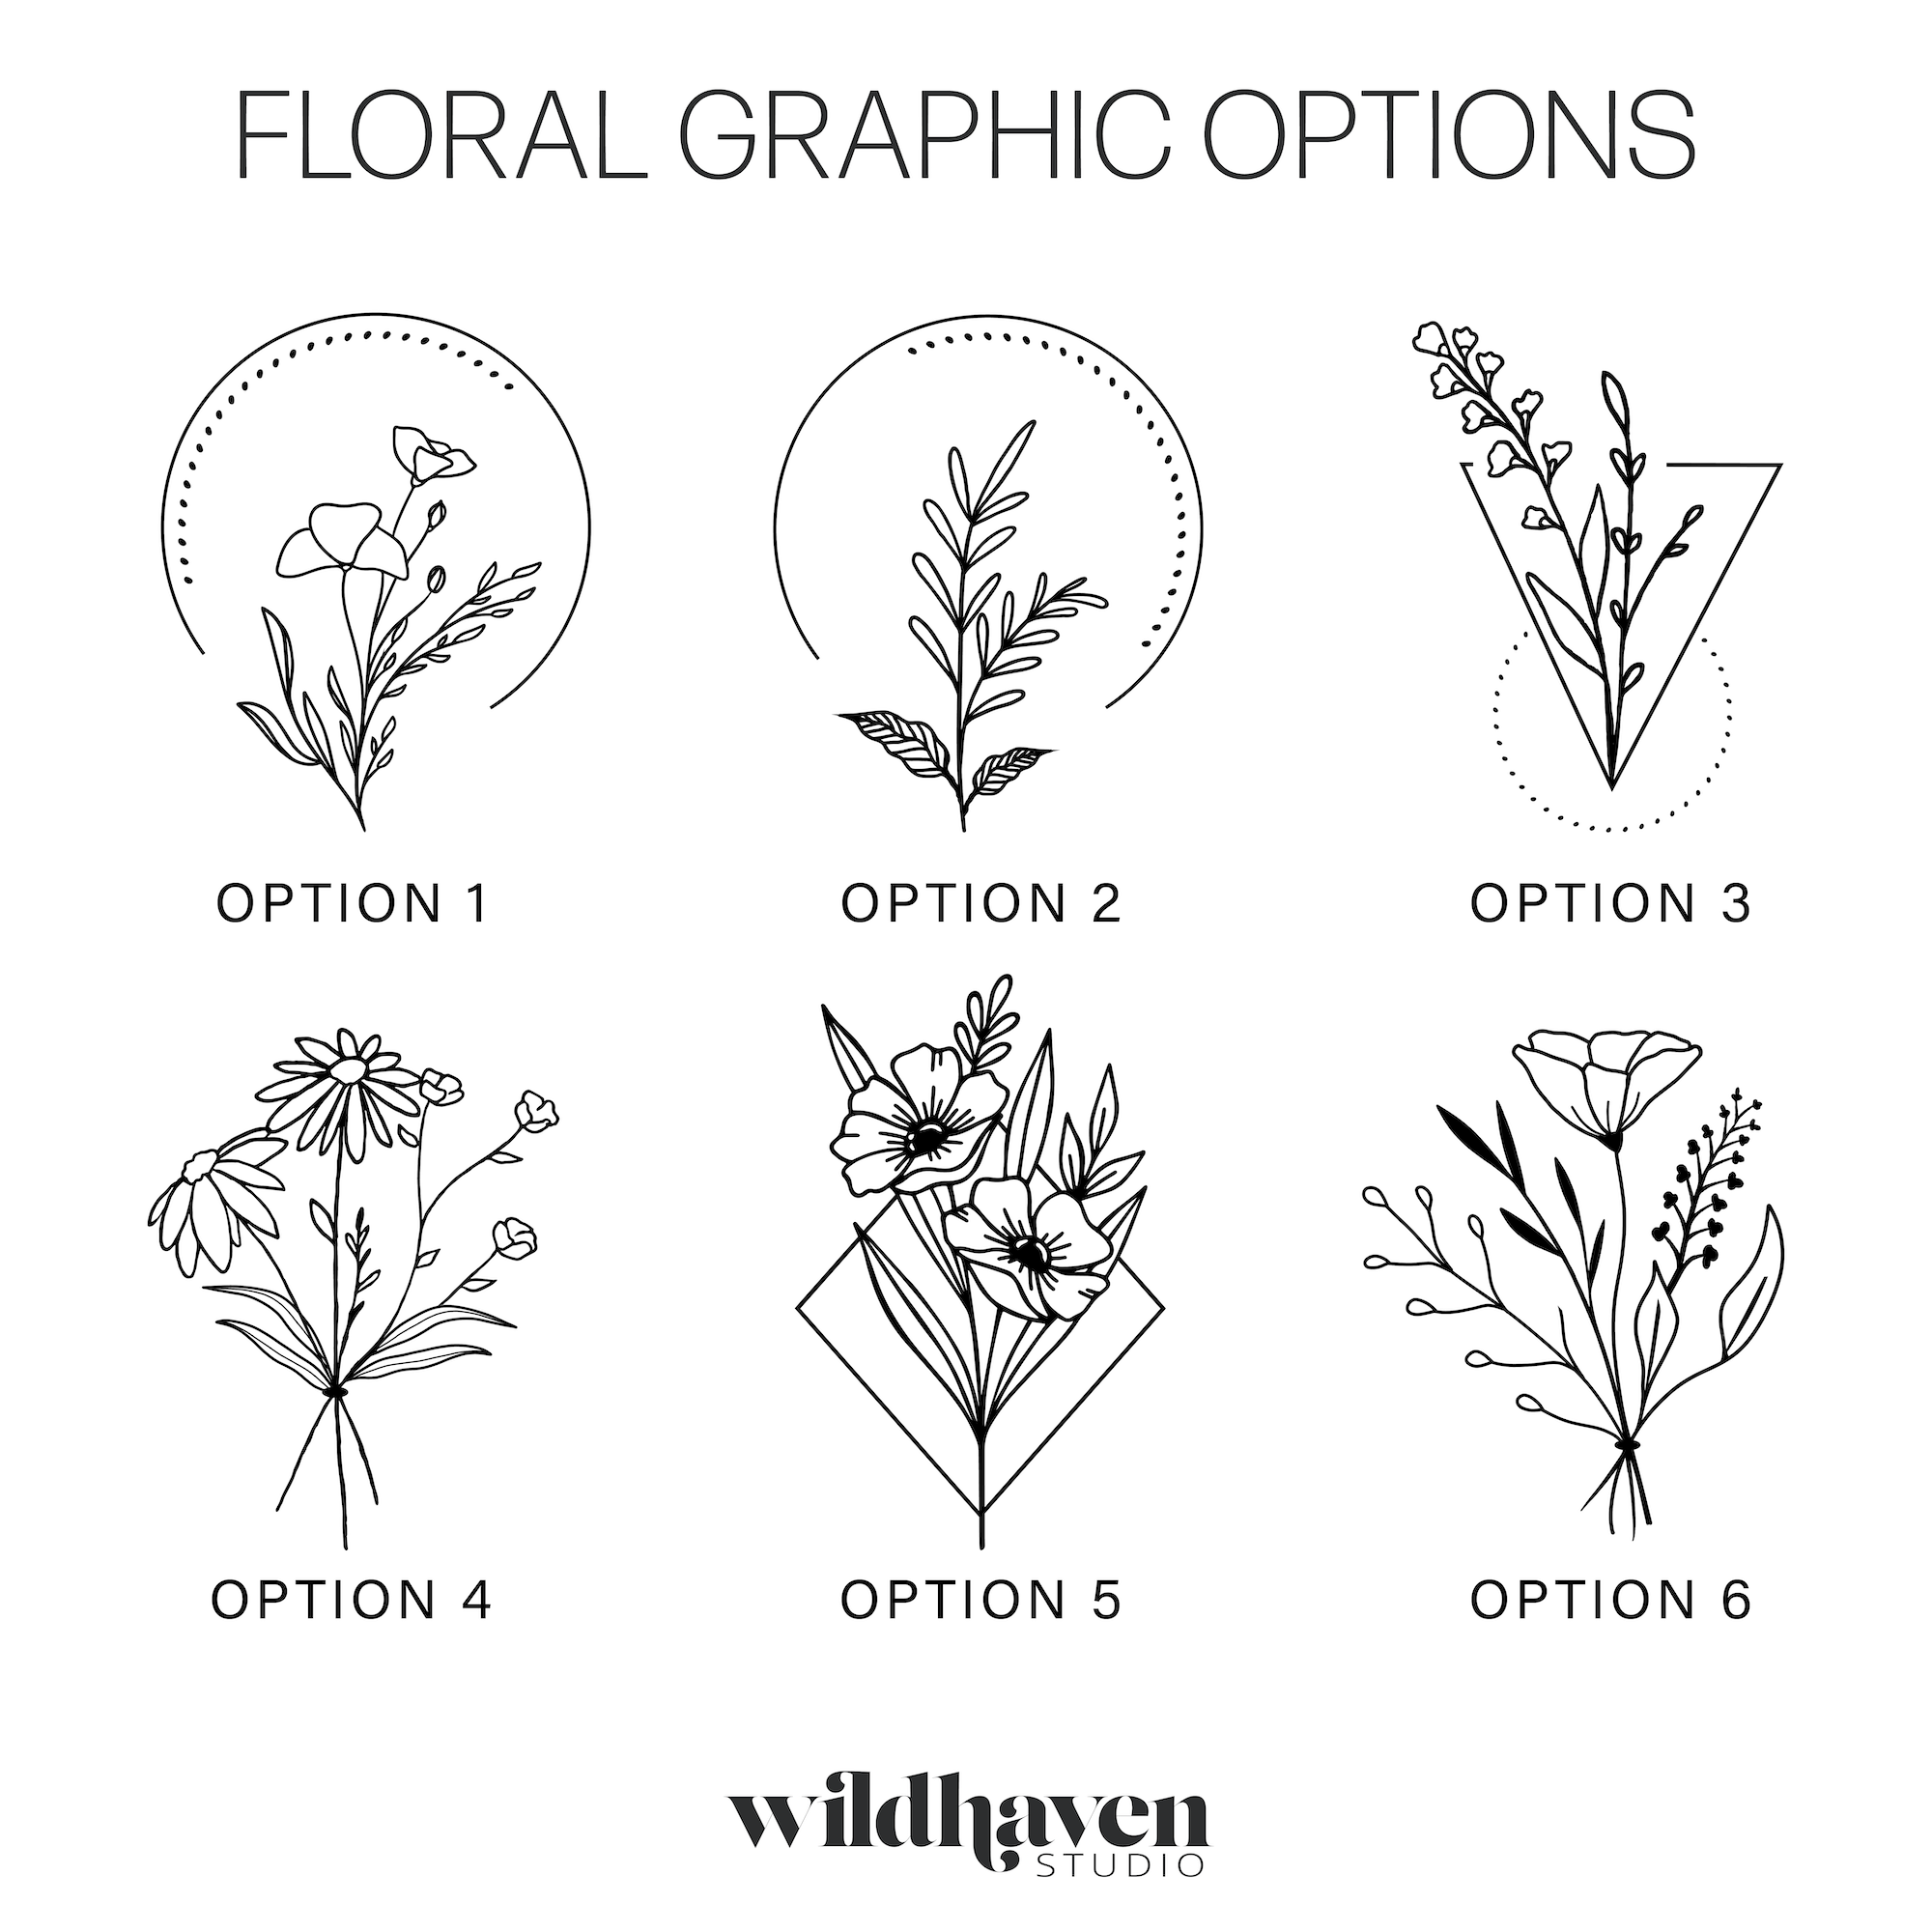 floral graphic options for can coolers